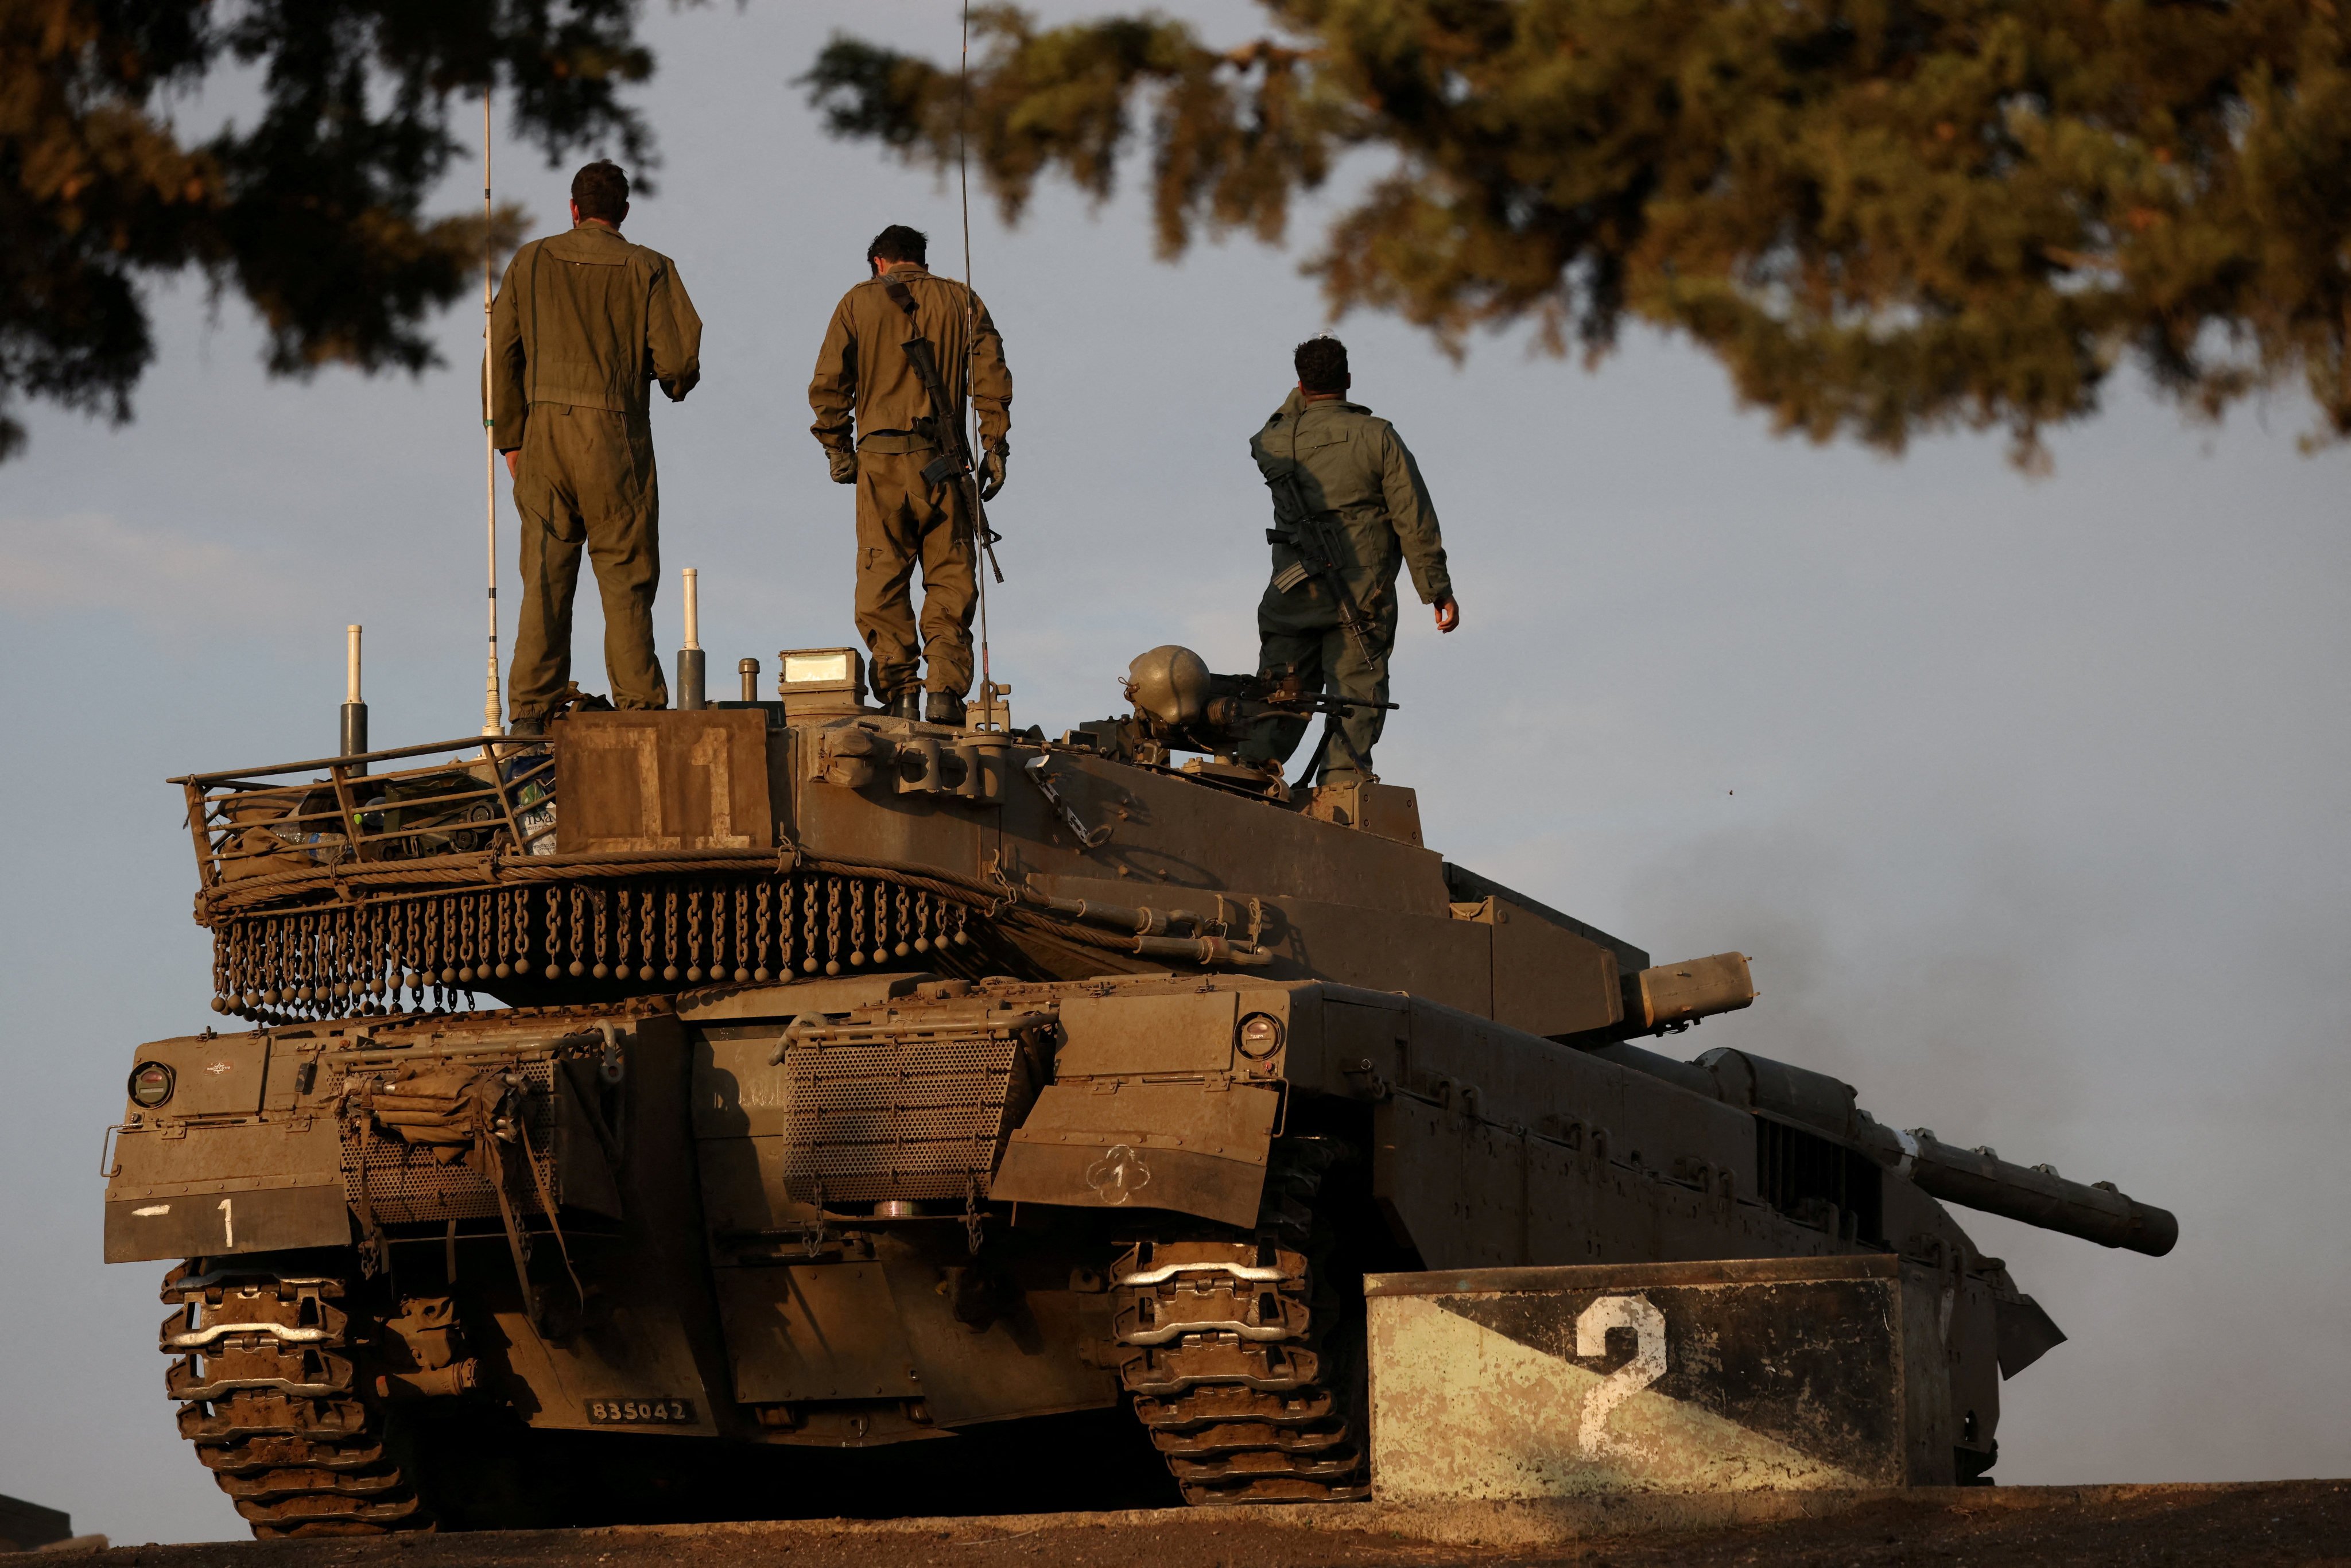 Israeli soldiers take part in a military drill near the border between Israel and Syria at the Israeli-occupied Golan Heights on Thursday. Photo: Reuters